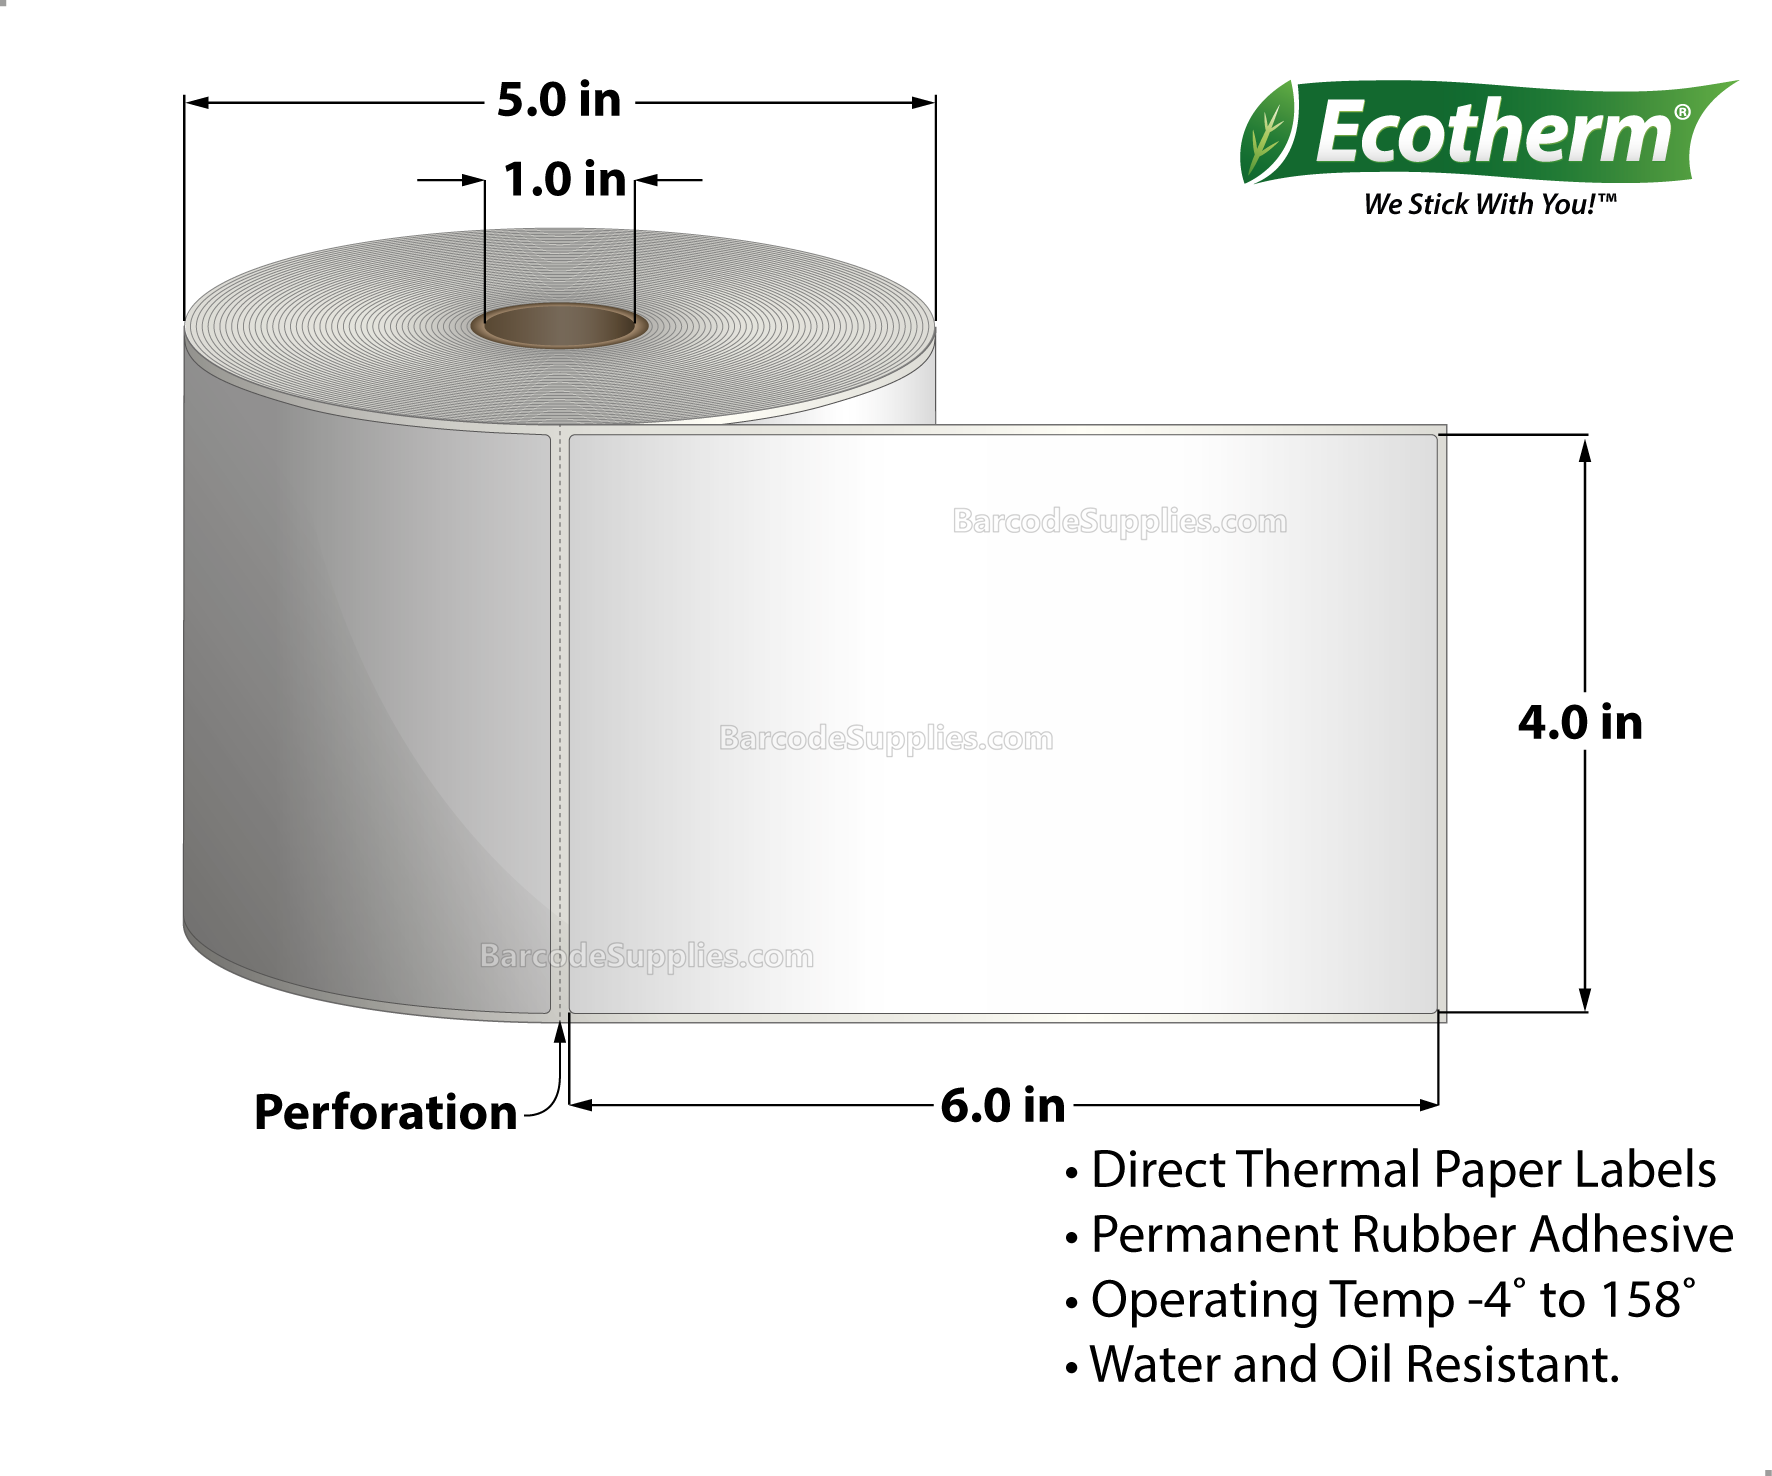 4 x 6 Direct Thermal White Labels With Rubber Adhesive - Perforated - 475 Labels Per Roll - Carton Of 6 Rolls - 2850 Labels Total - MPN: ECOTHERM15154-6